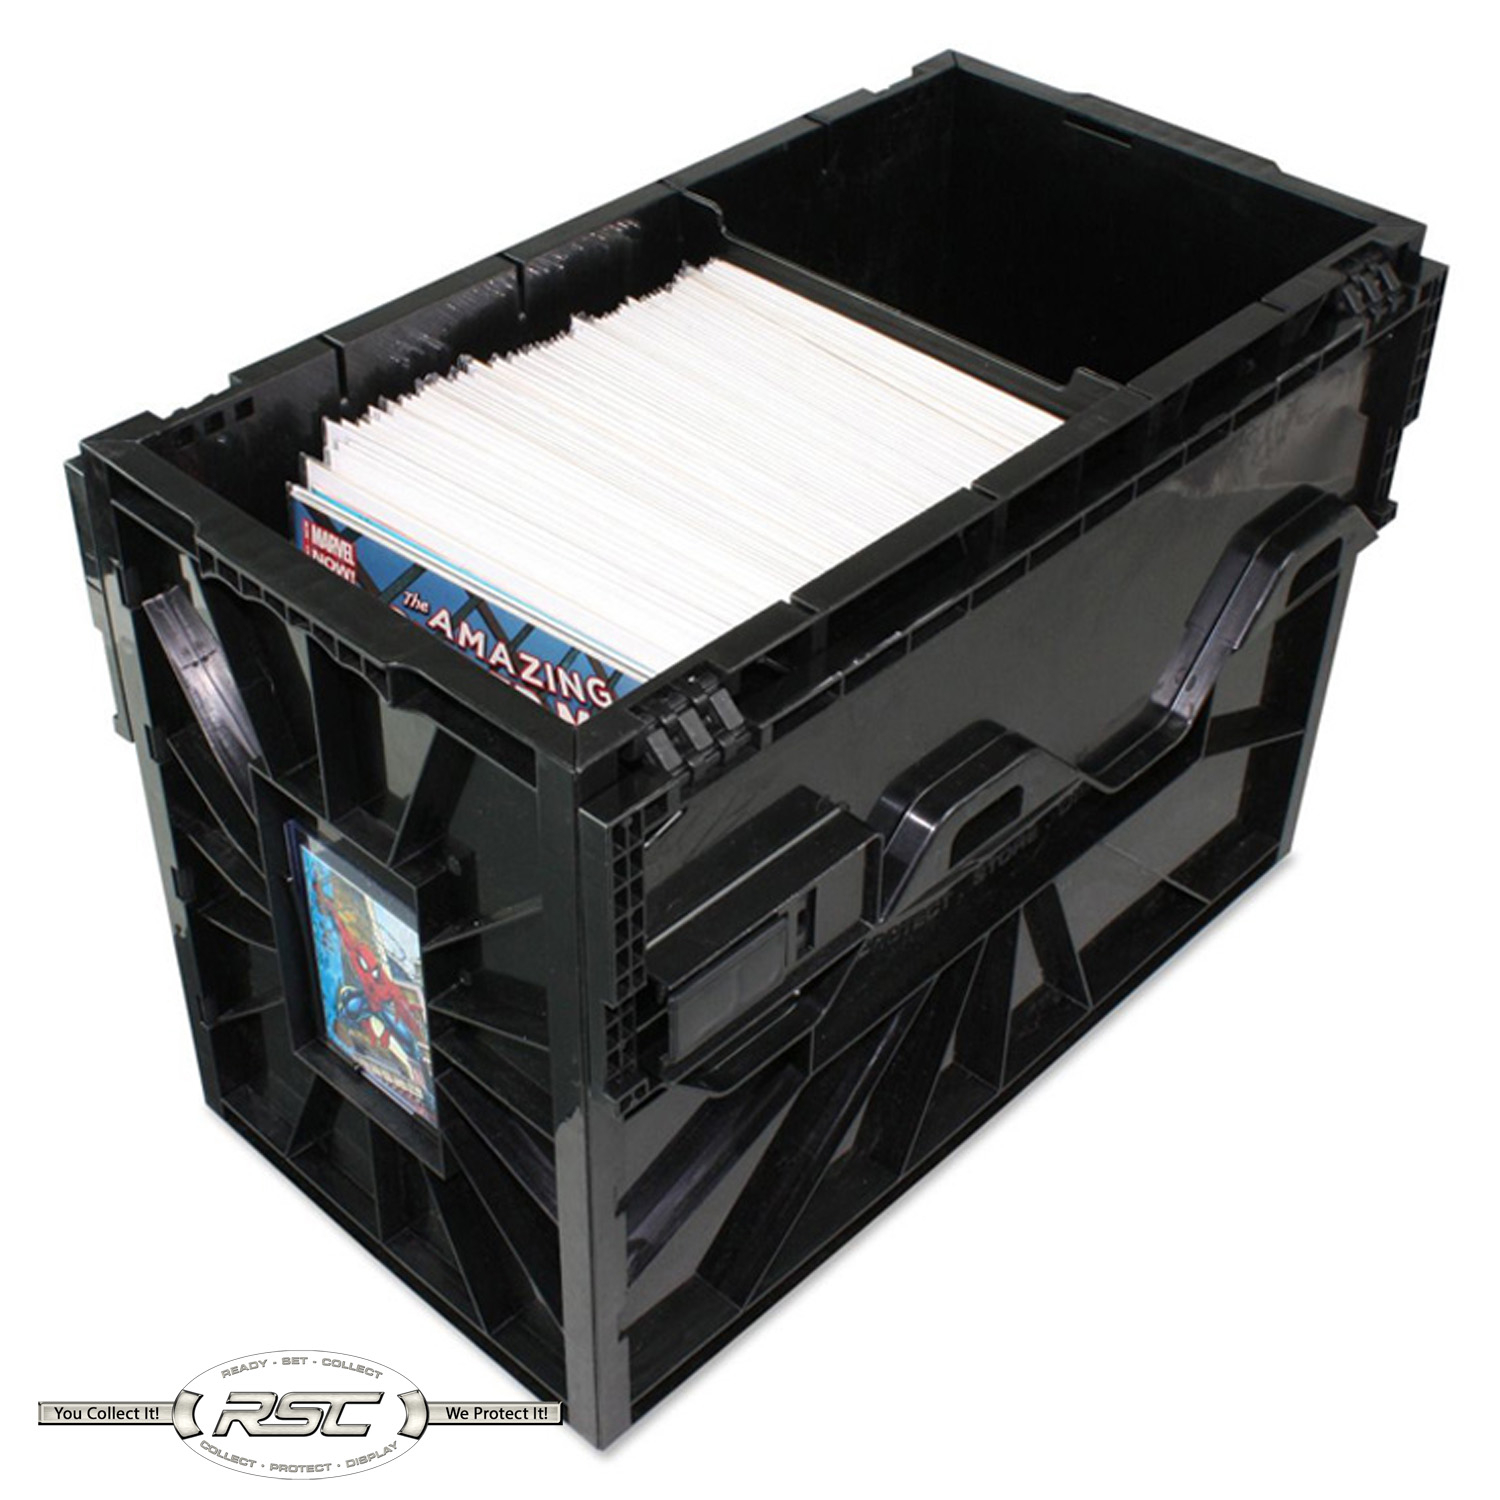 Short Comic Book Bin Black Plastic Storage Box Wone Partition intended for dimensions 1500 X 1500